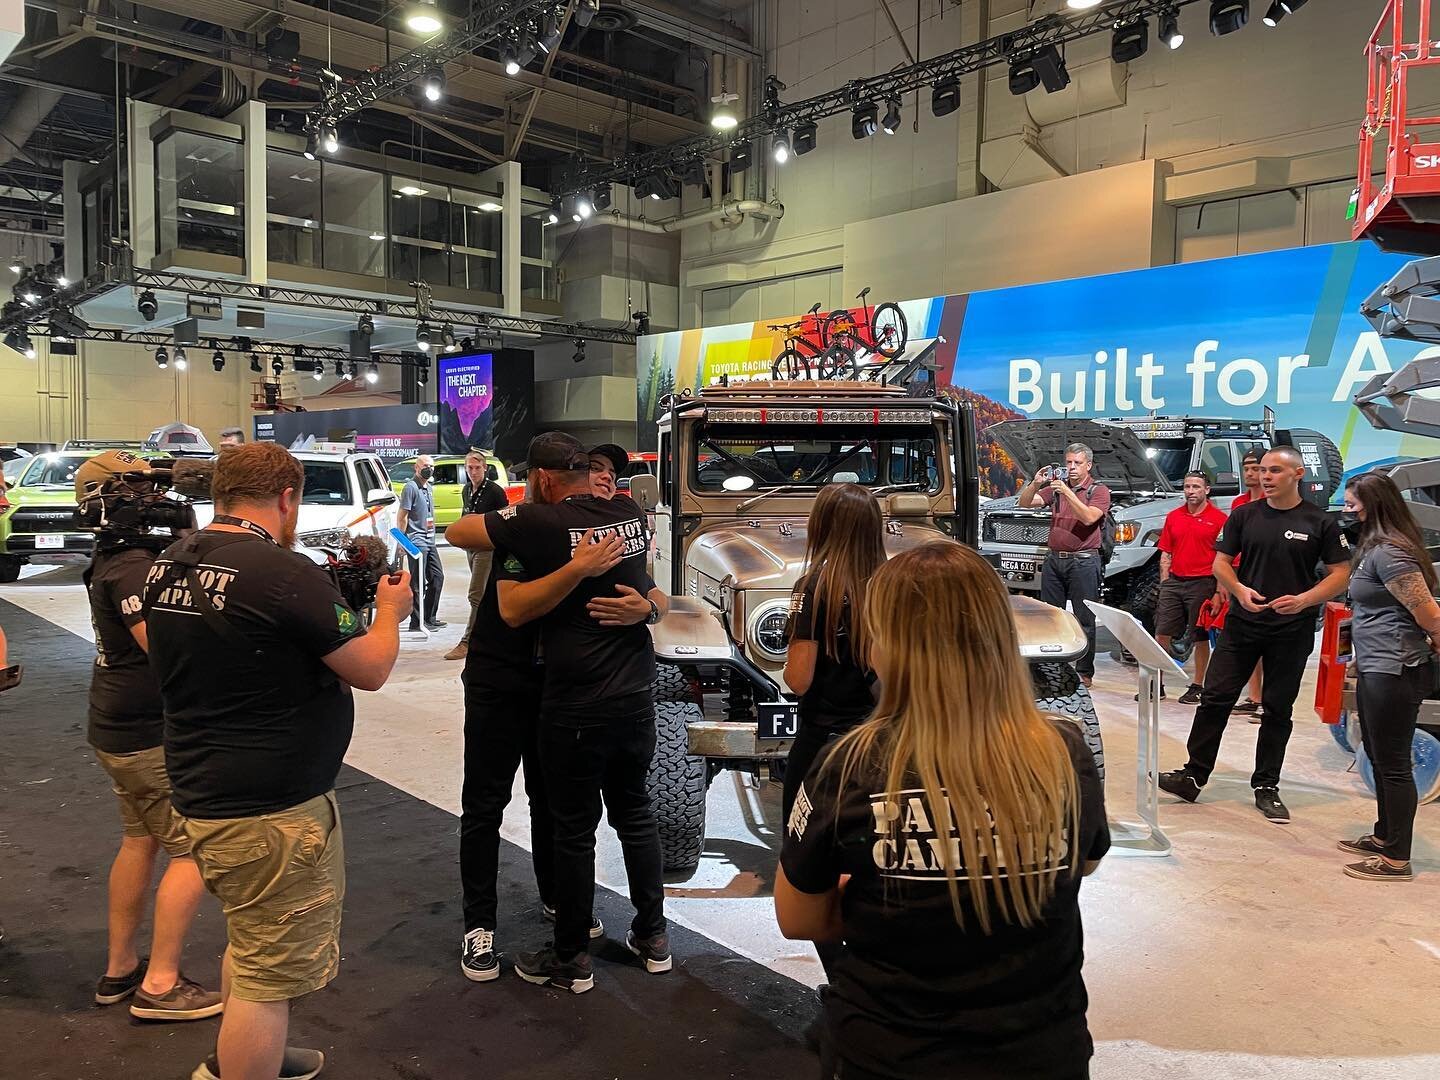 Massive congratulations to the @patriot.campers team. They pulled off a miracle, getting 3 trucks and a trailer featured in the @toyotausa booth at @semashow. Justin and Sarah did everything in their power to make this dream come true for their kids.